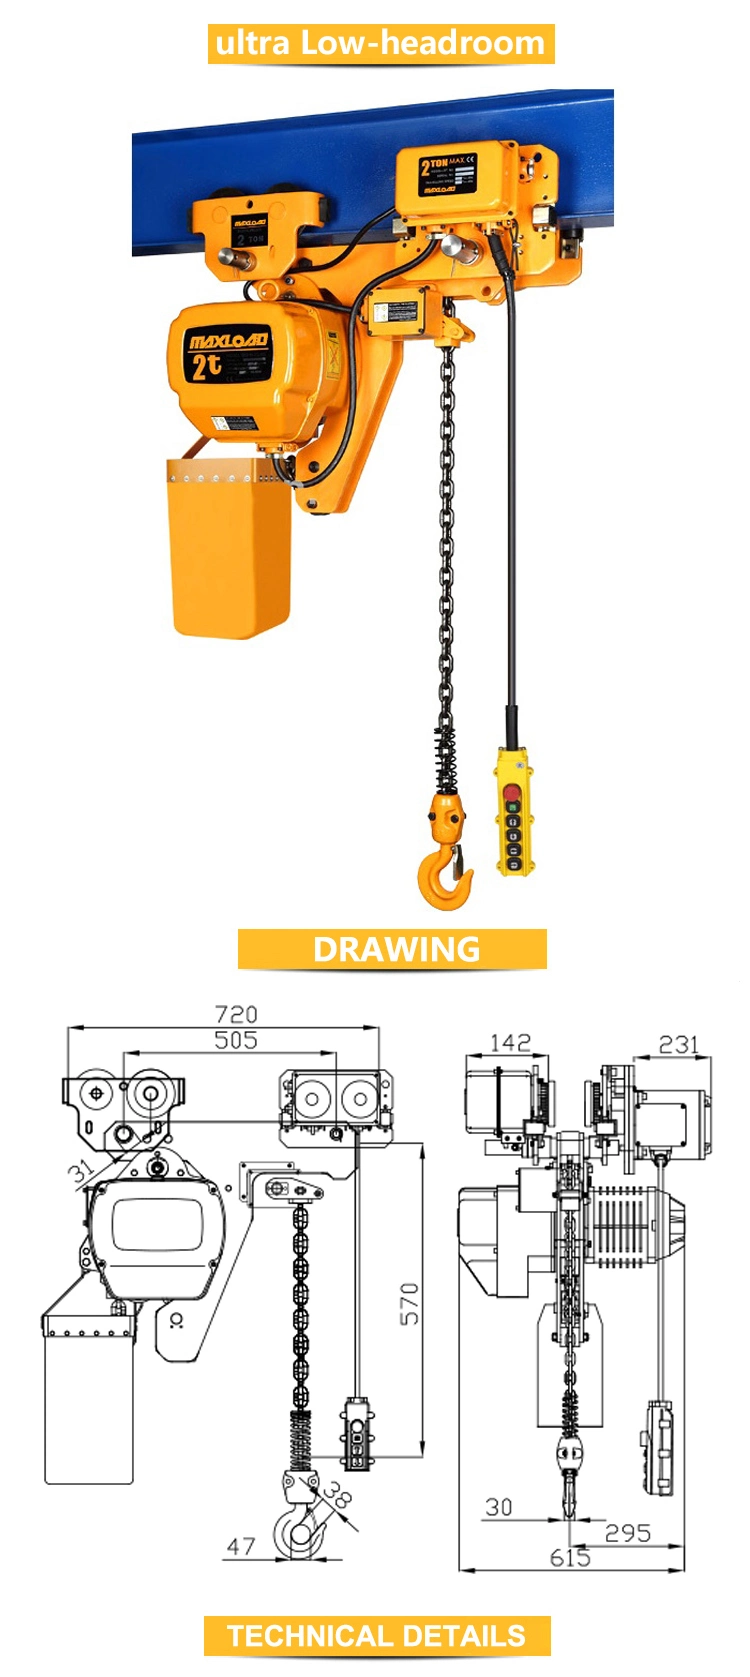 Lifting Equipment 2 Ton Lifting Hoist with Ultra Low-Headroom Type